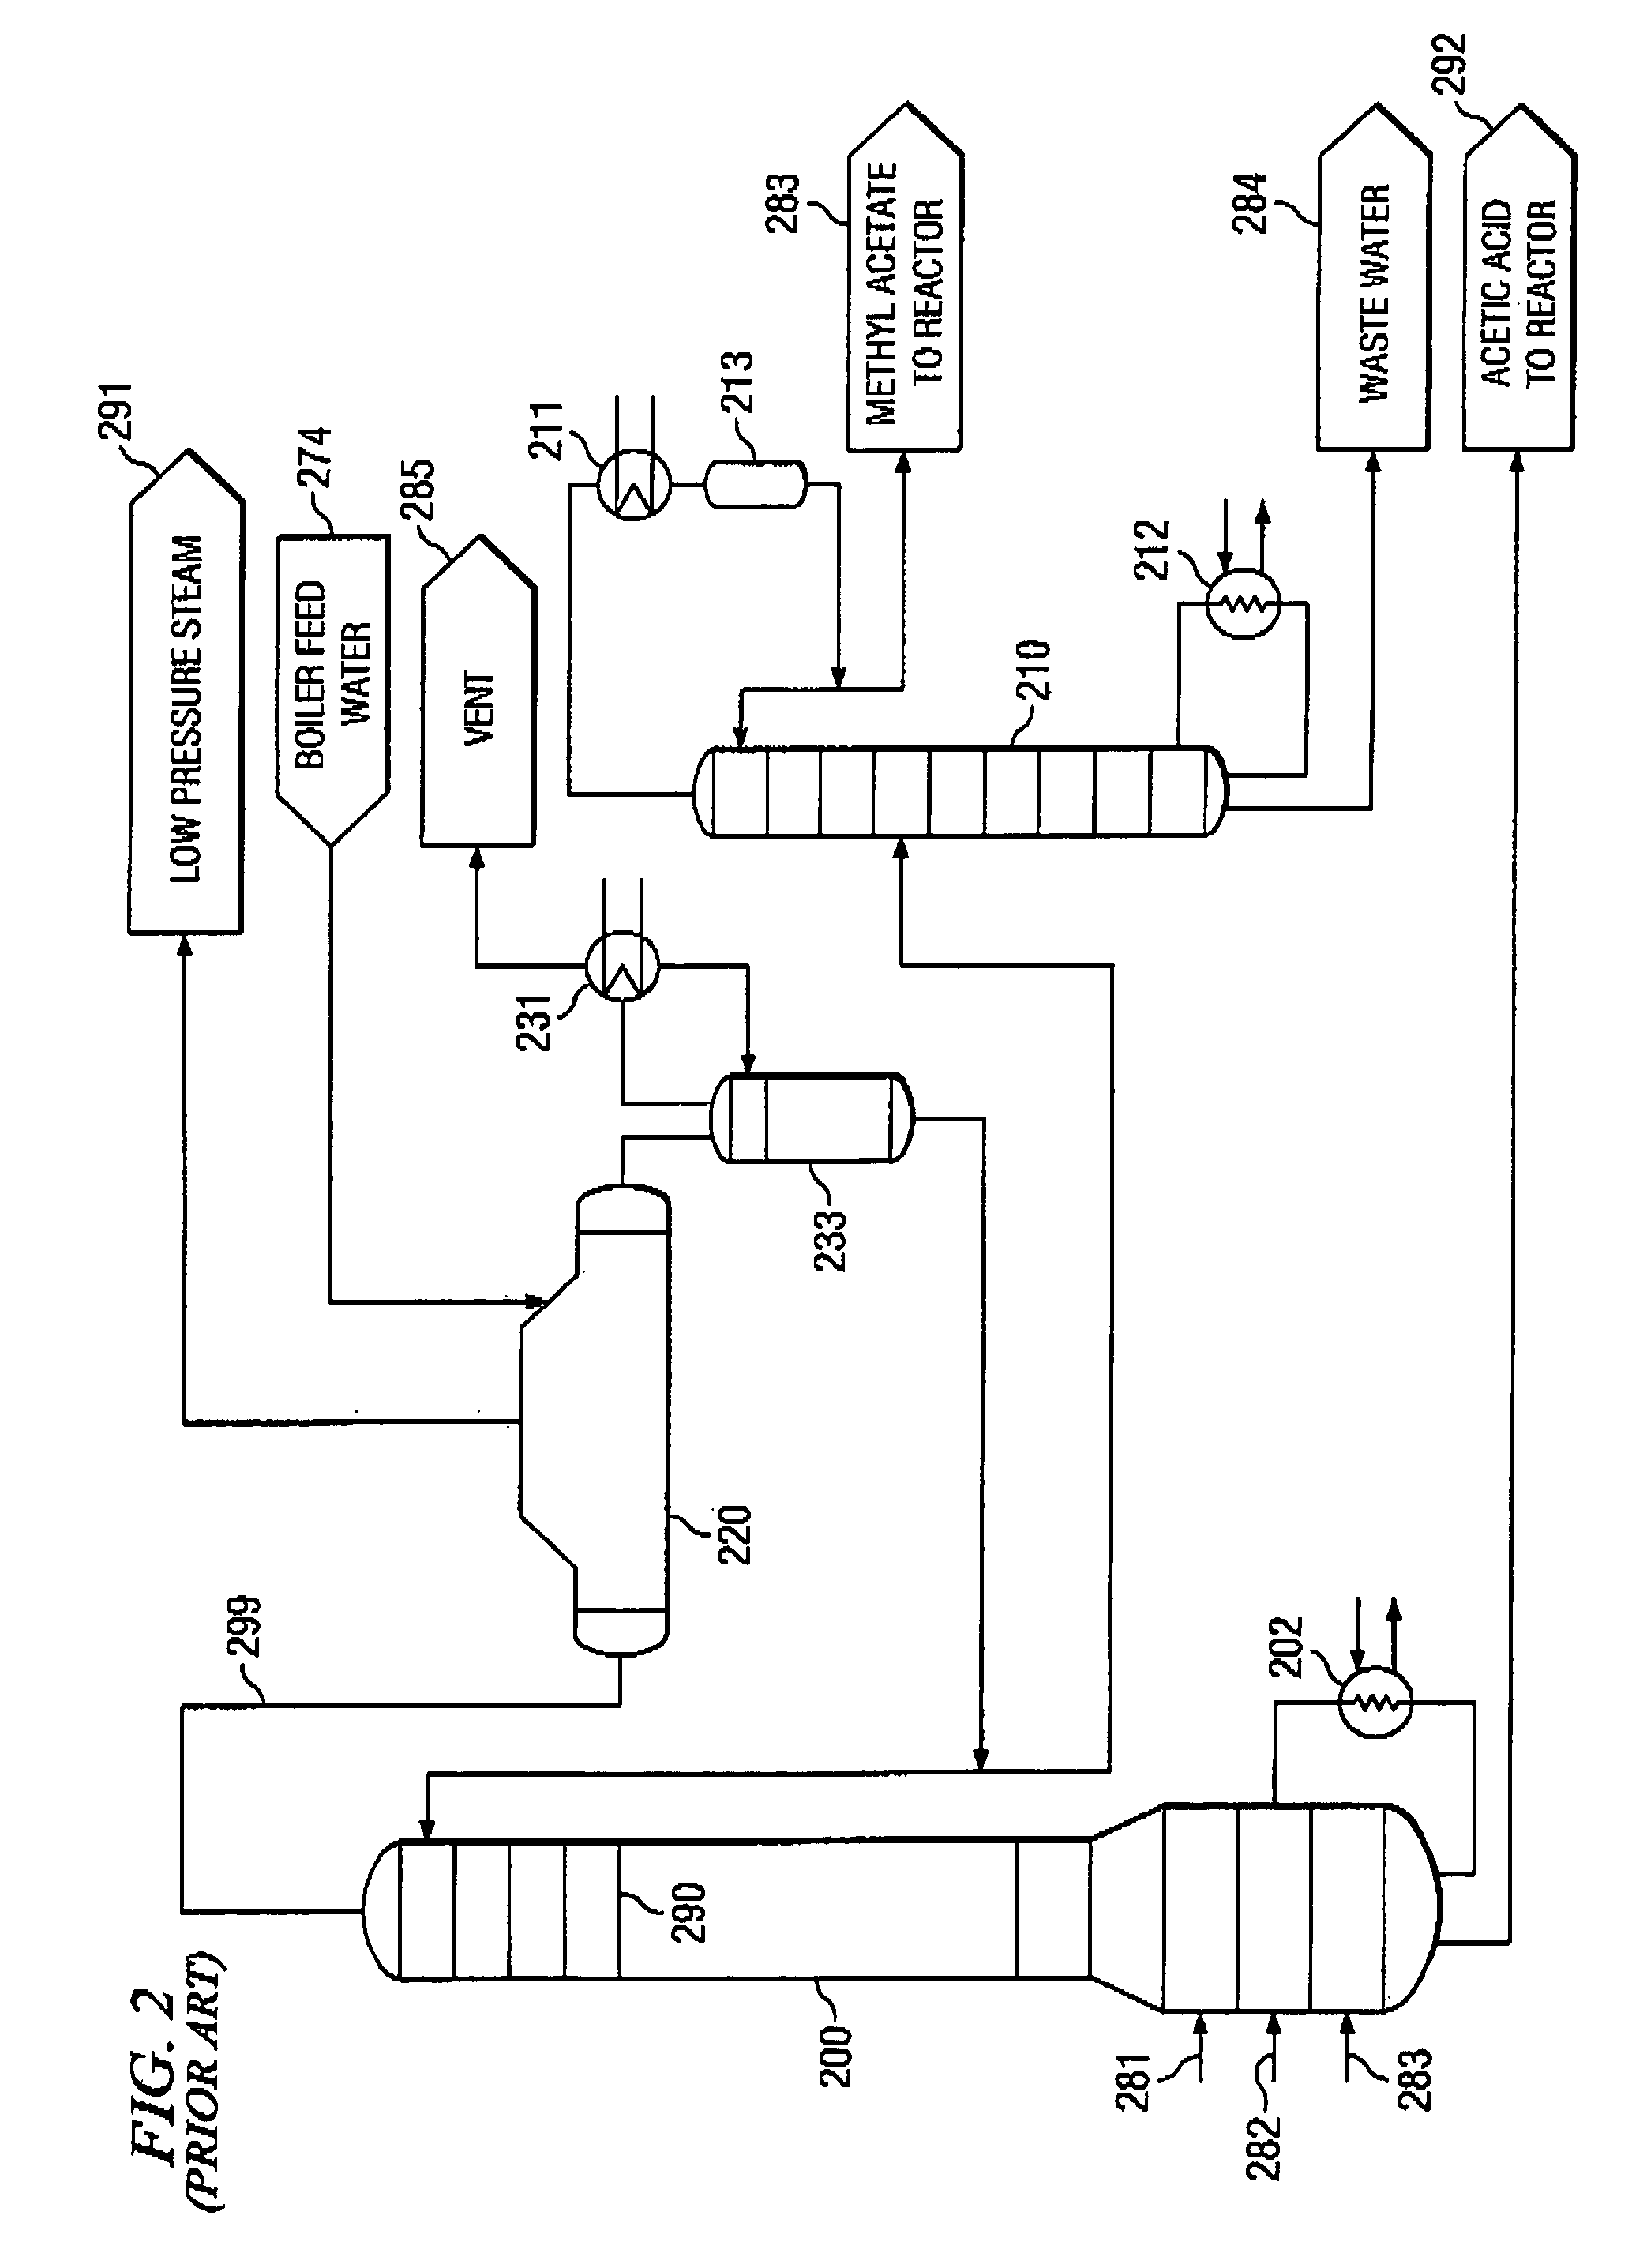 System and method for acetic acid recovery during terephthalic acid production